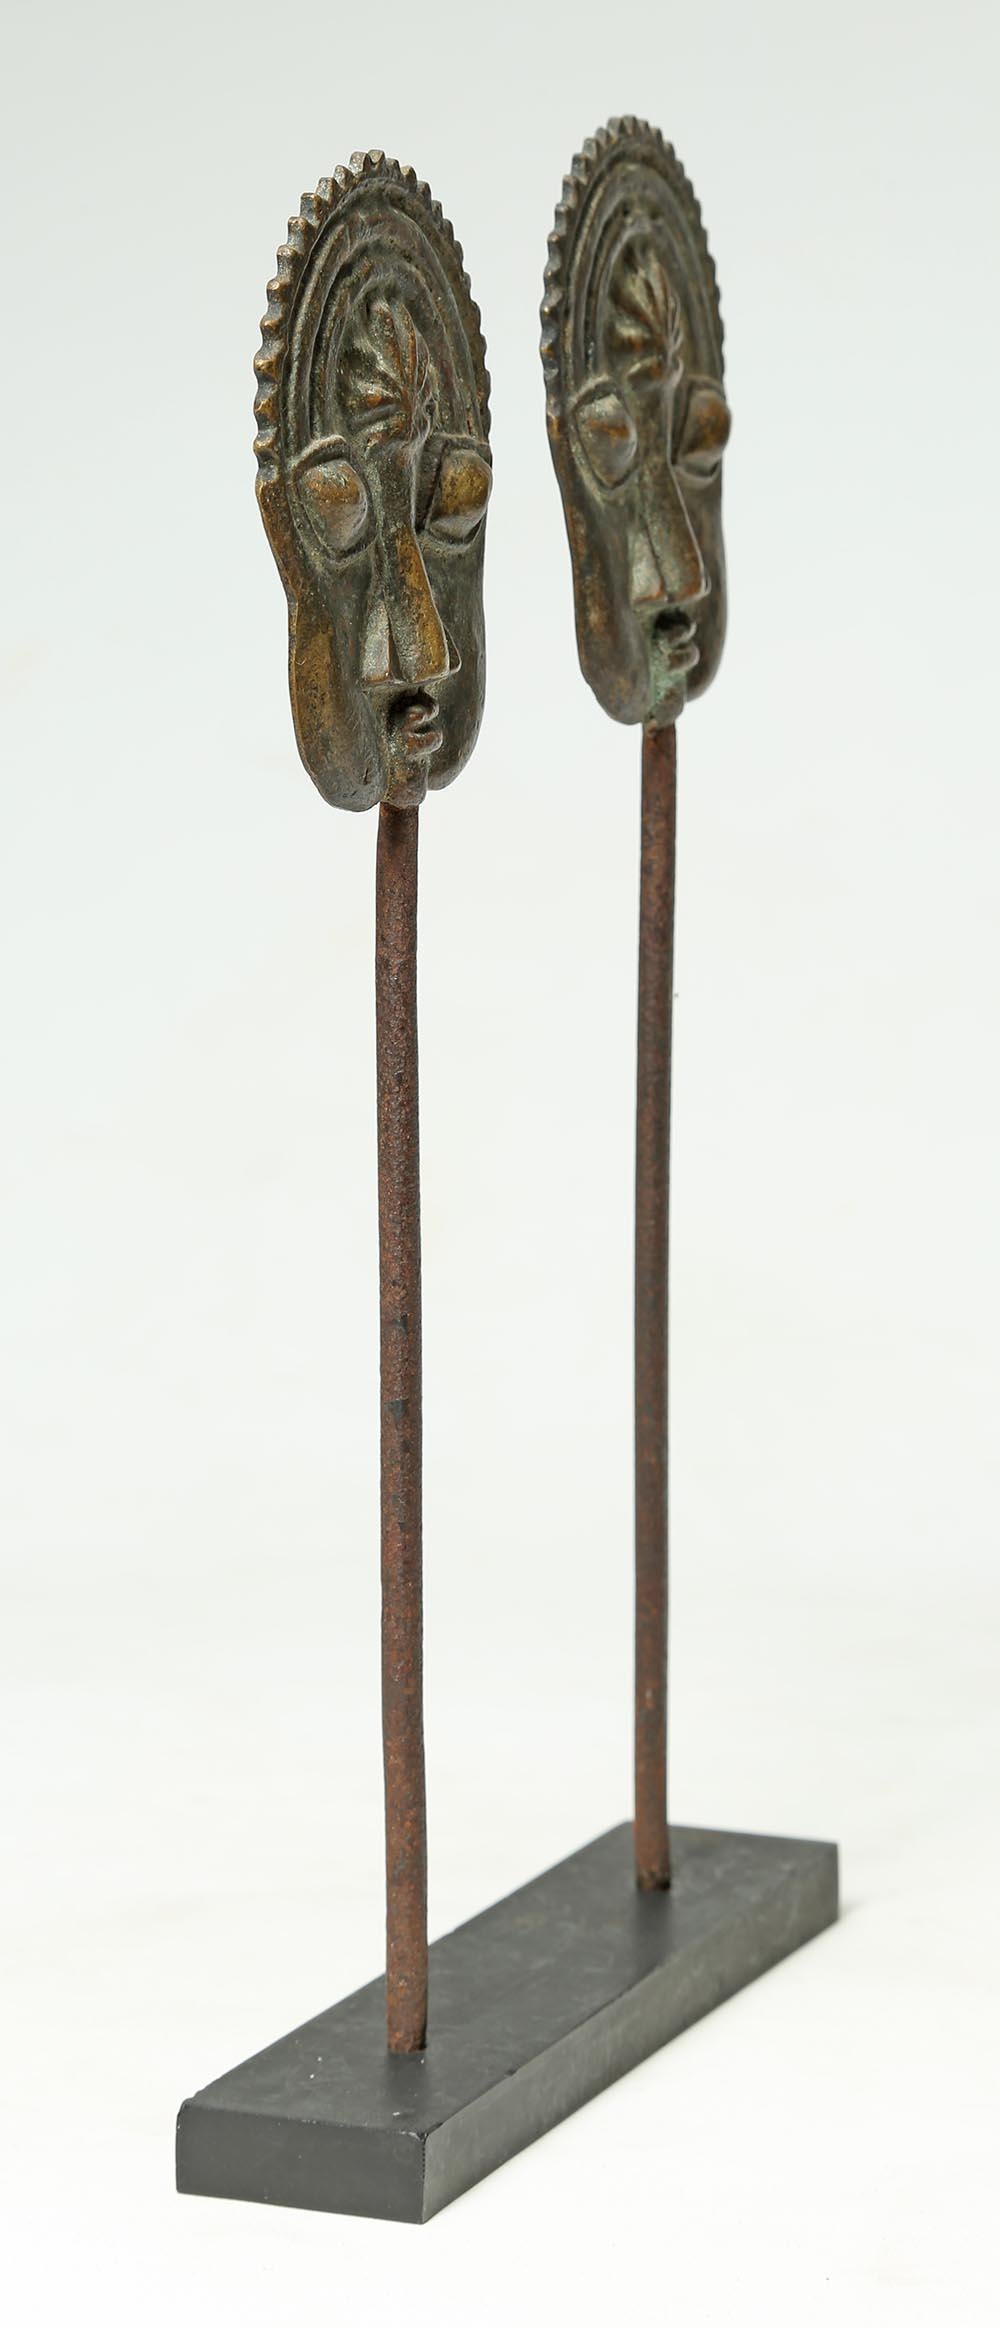 Yoruba Tribal Ogboni Pair of Brass Pins with Faces, Nigeria Early 20th Century For Sale 1